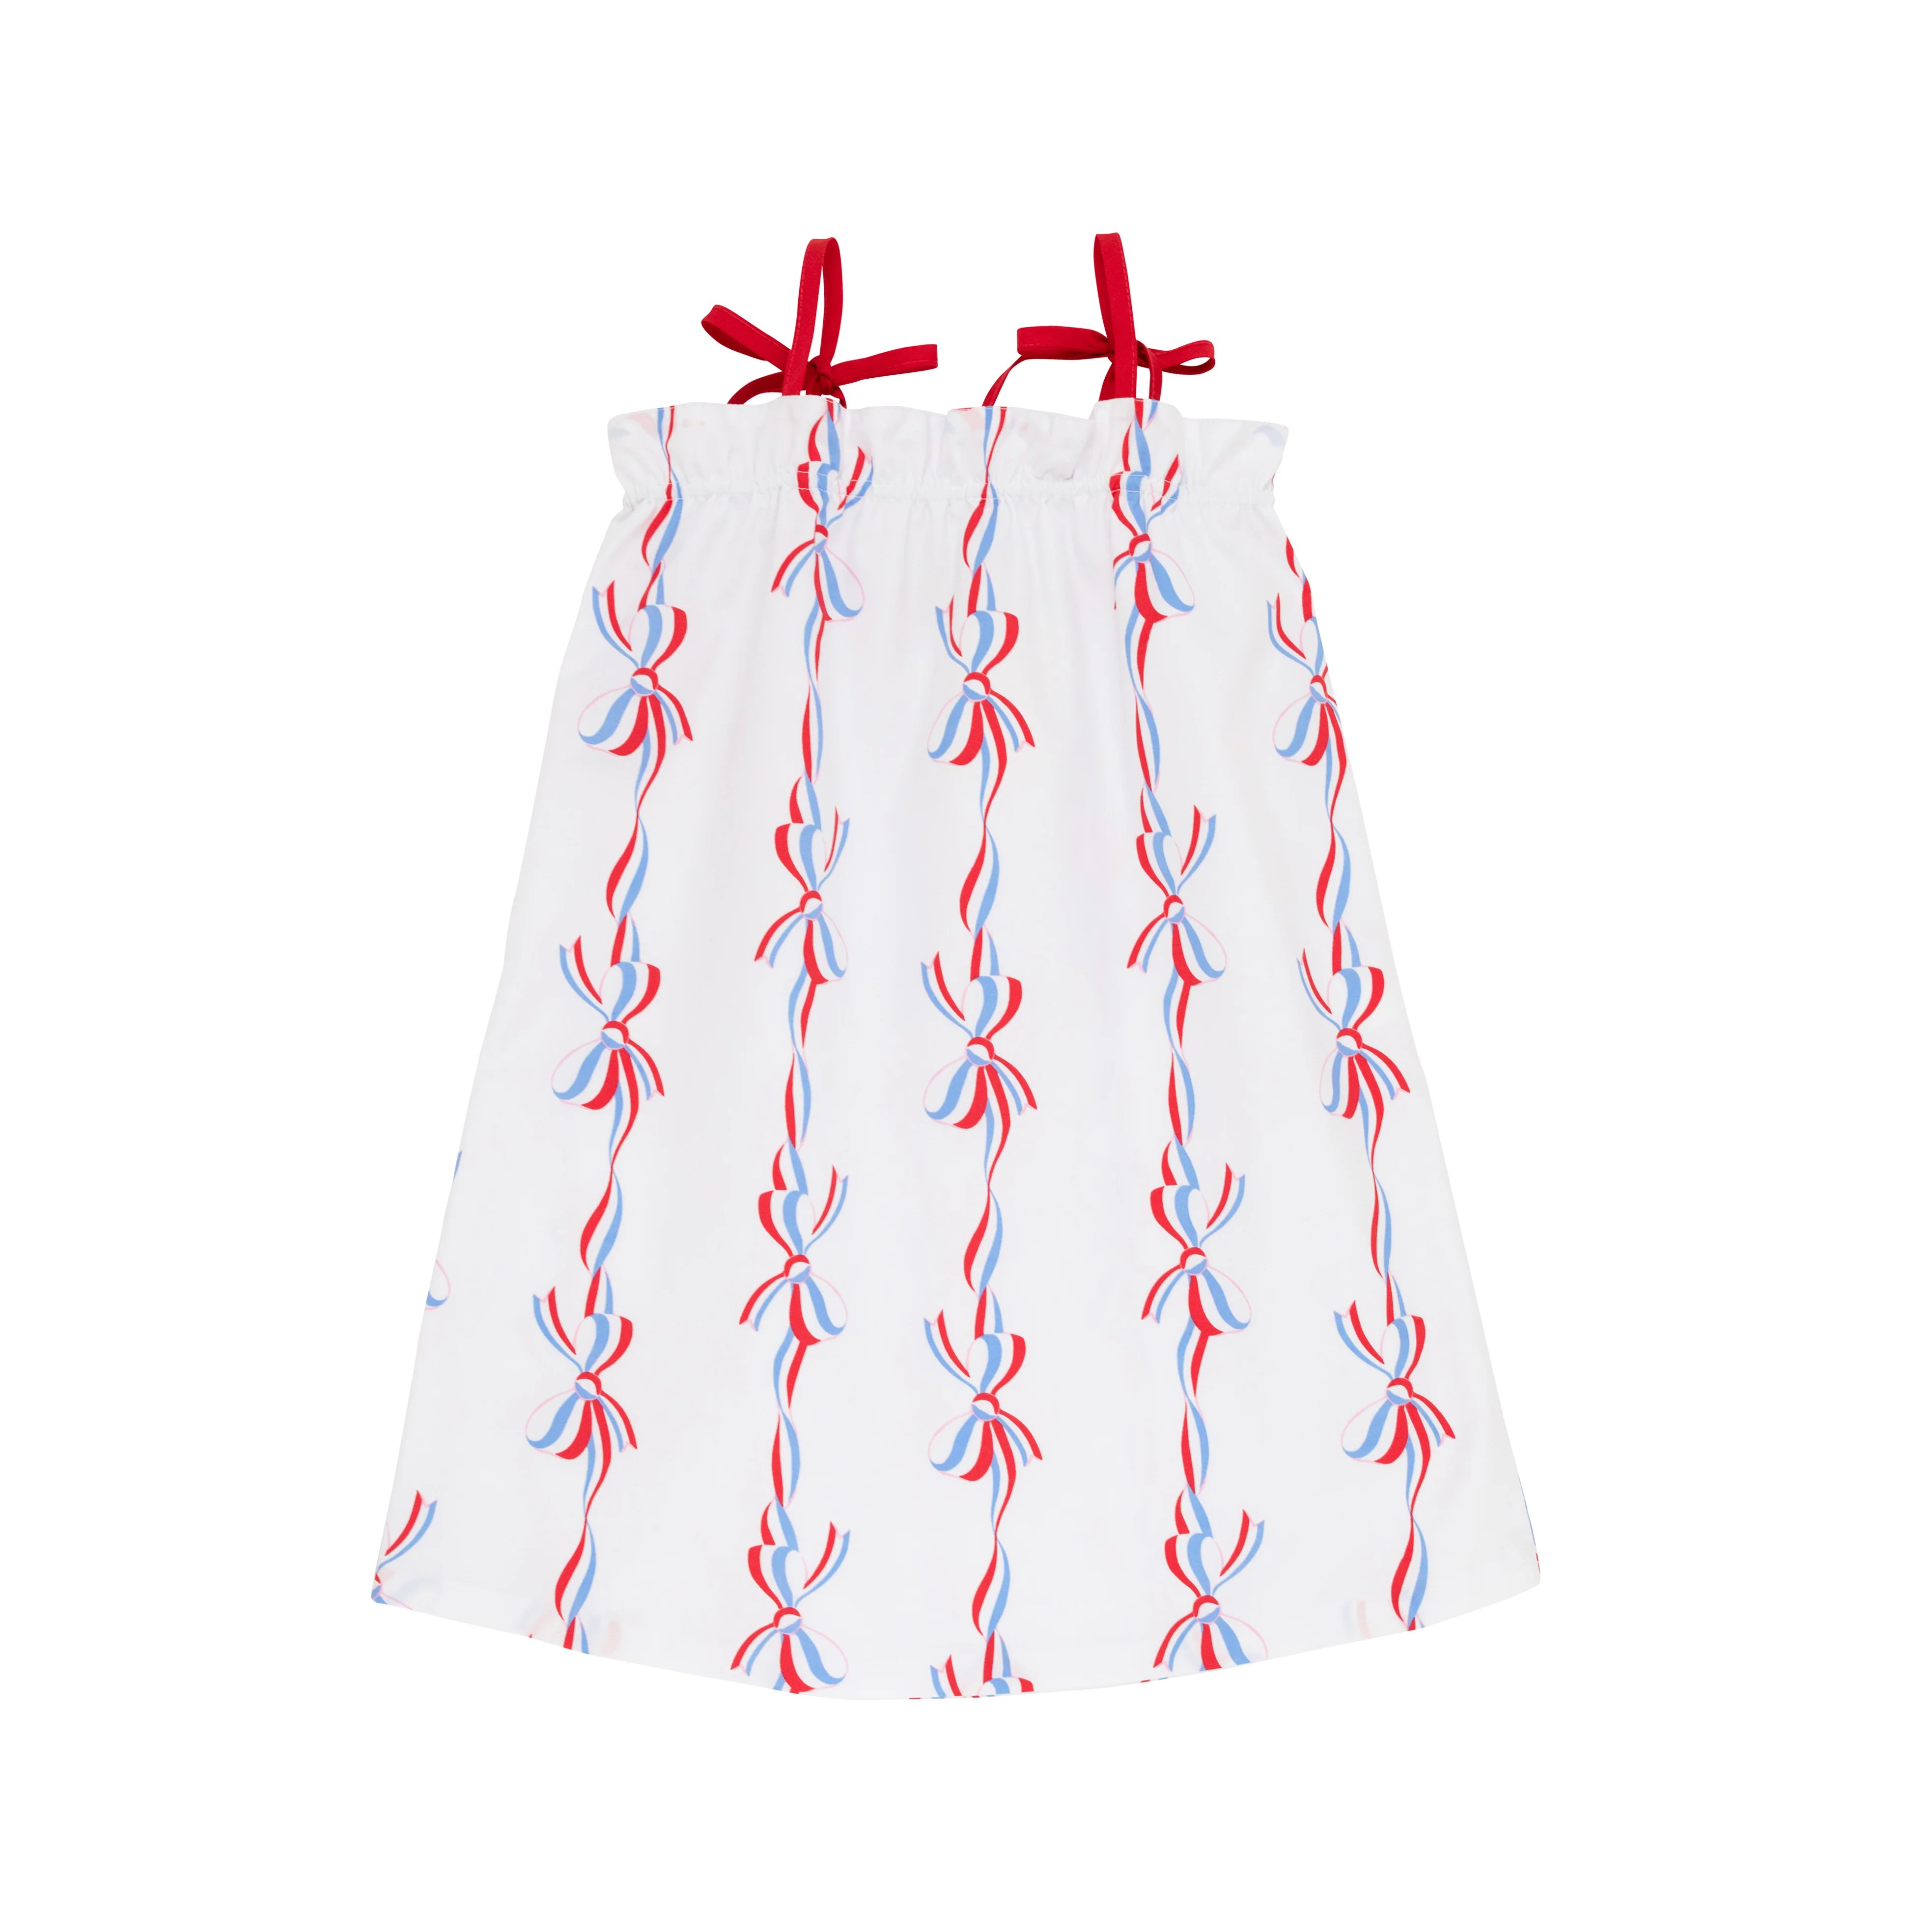 Lainey's Little Dress - America's Birthday Bows with Richmond Red | The Beaufort Bonnet Company